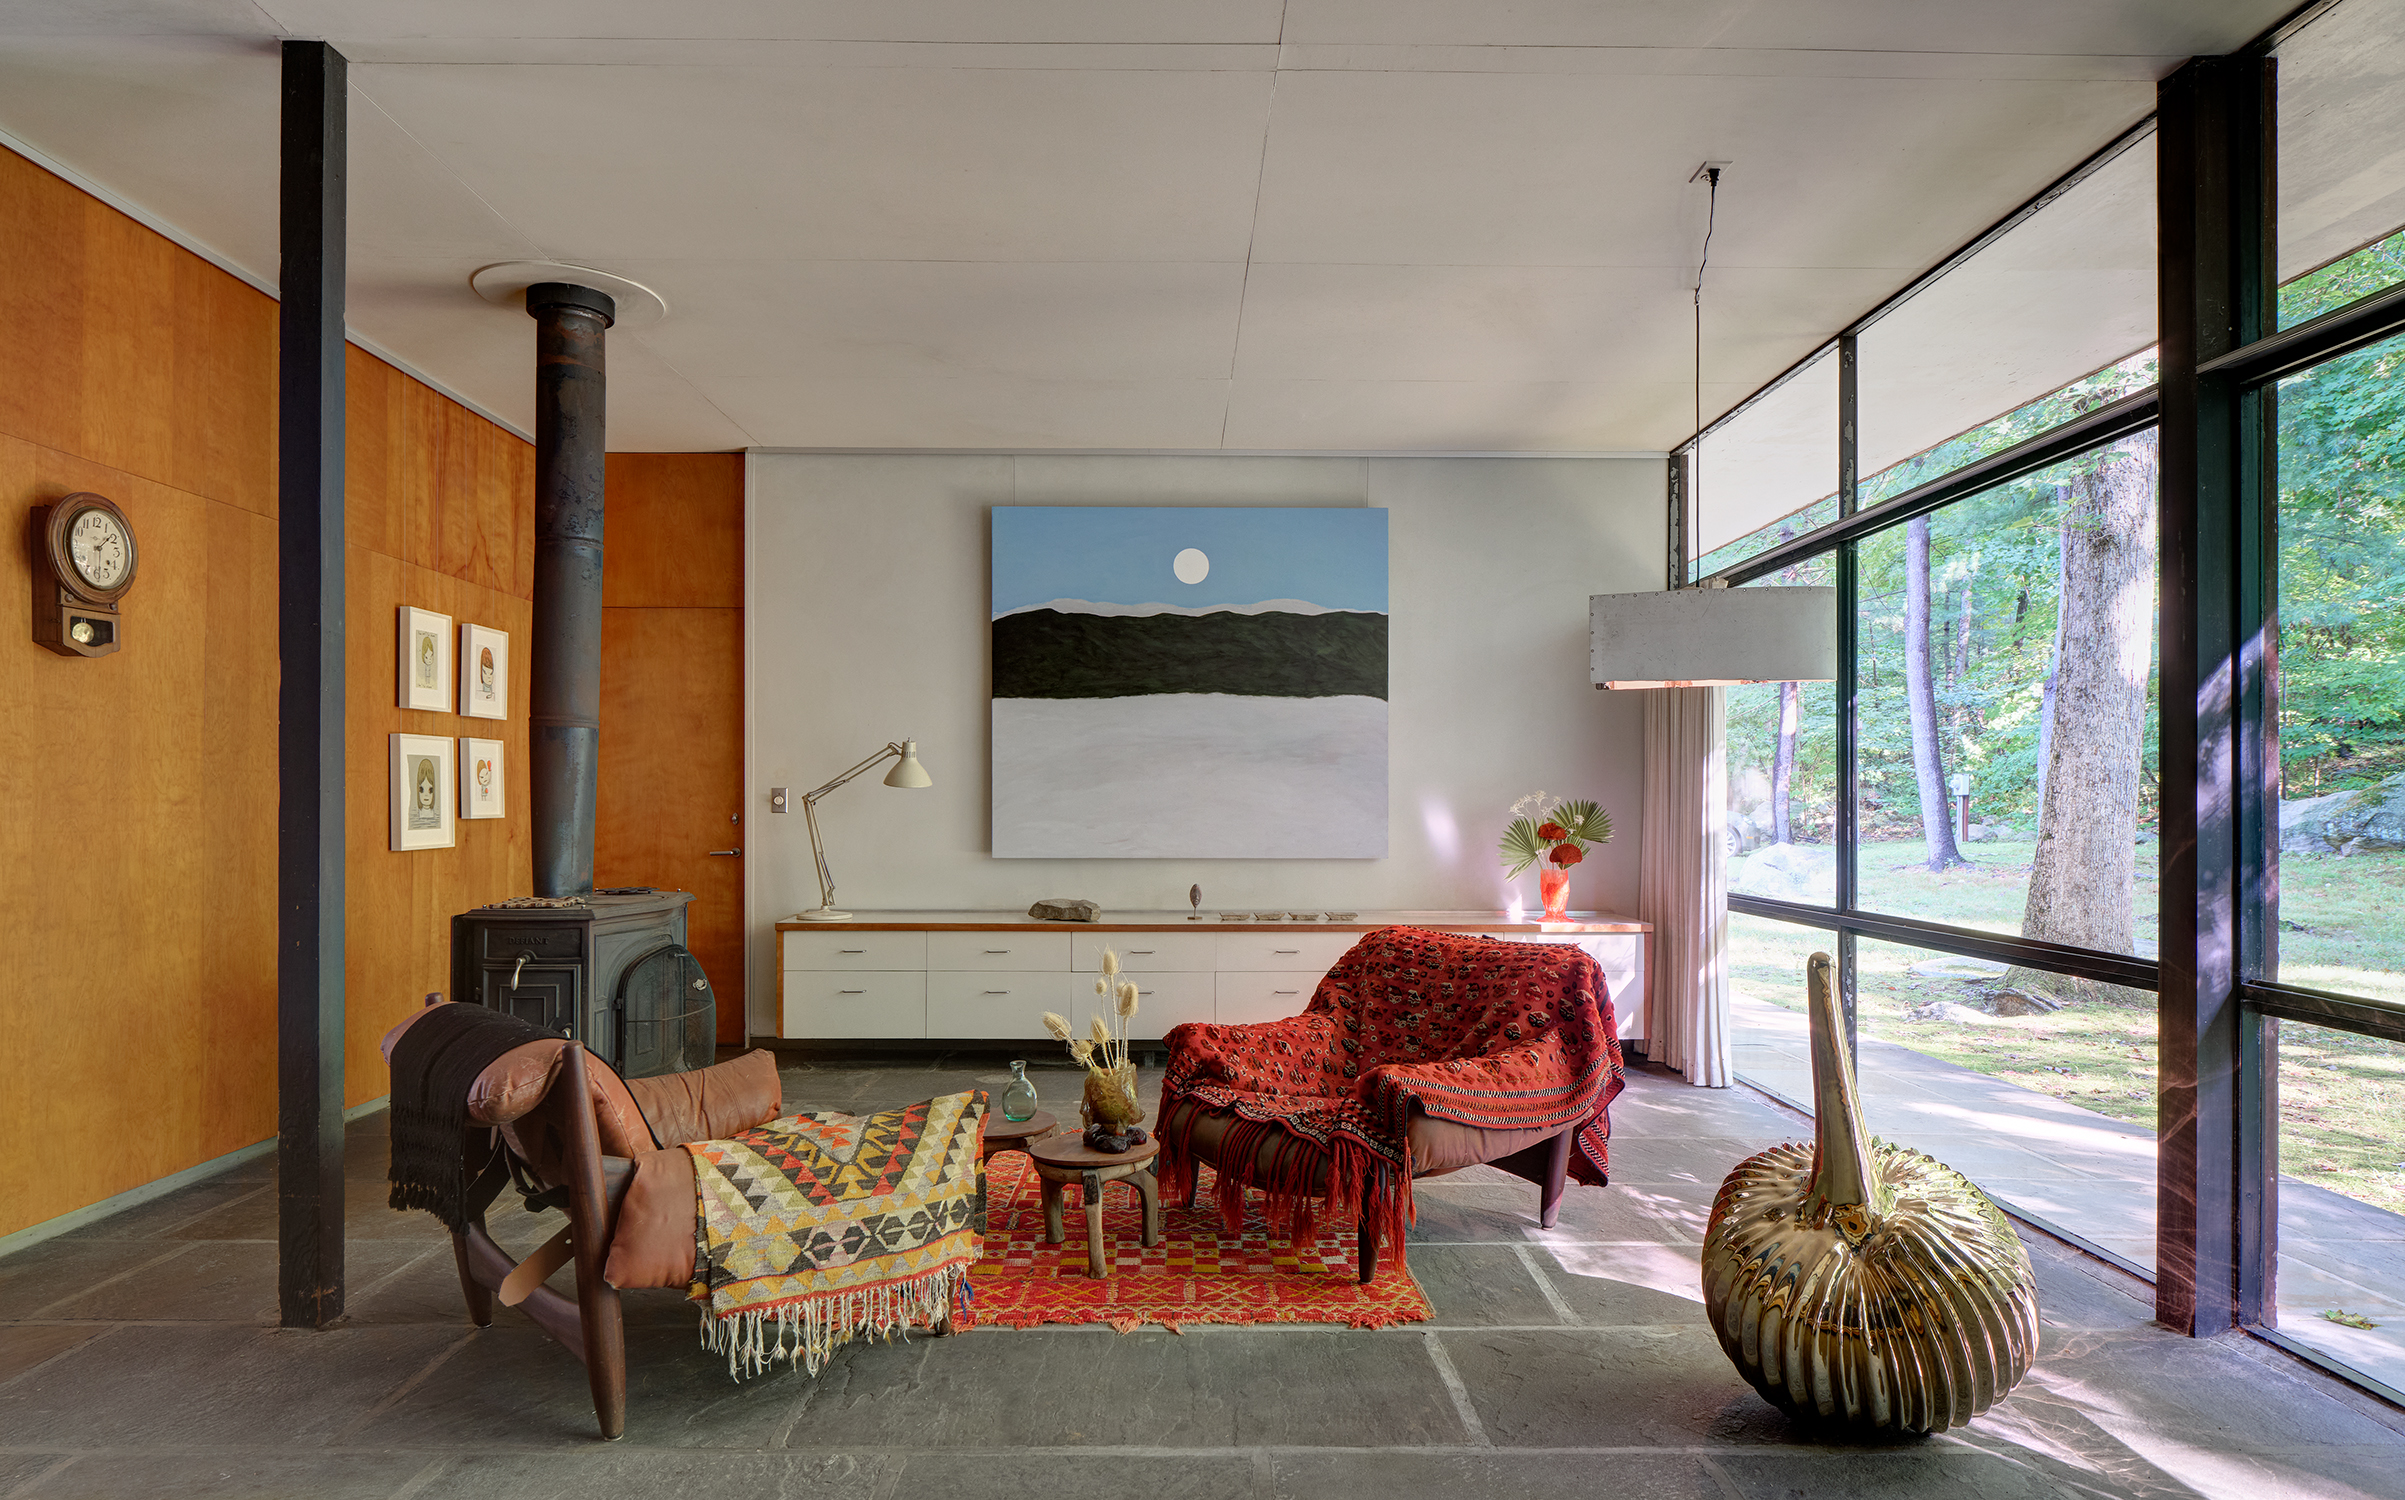 At The Noyes House: Blum & Poe, Mendes Wood DM and Object & Thing. The Noyes House, New Canaan, Connecticut. Photo by Michael Biondo. Works pictured [left to right]: Yoshitomo Nara, four drawings (2019); Patricia Leite, Entre Nuvens (2020); Gaetano Pesce, Table Top Vase (2020); Green River Project LLC, Airline Pendant (2020); Gaetano Pesce, Drip Vase (2020); Alma Allen, Not Yet Titled (2020).